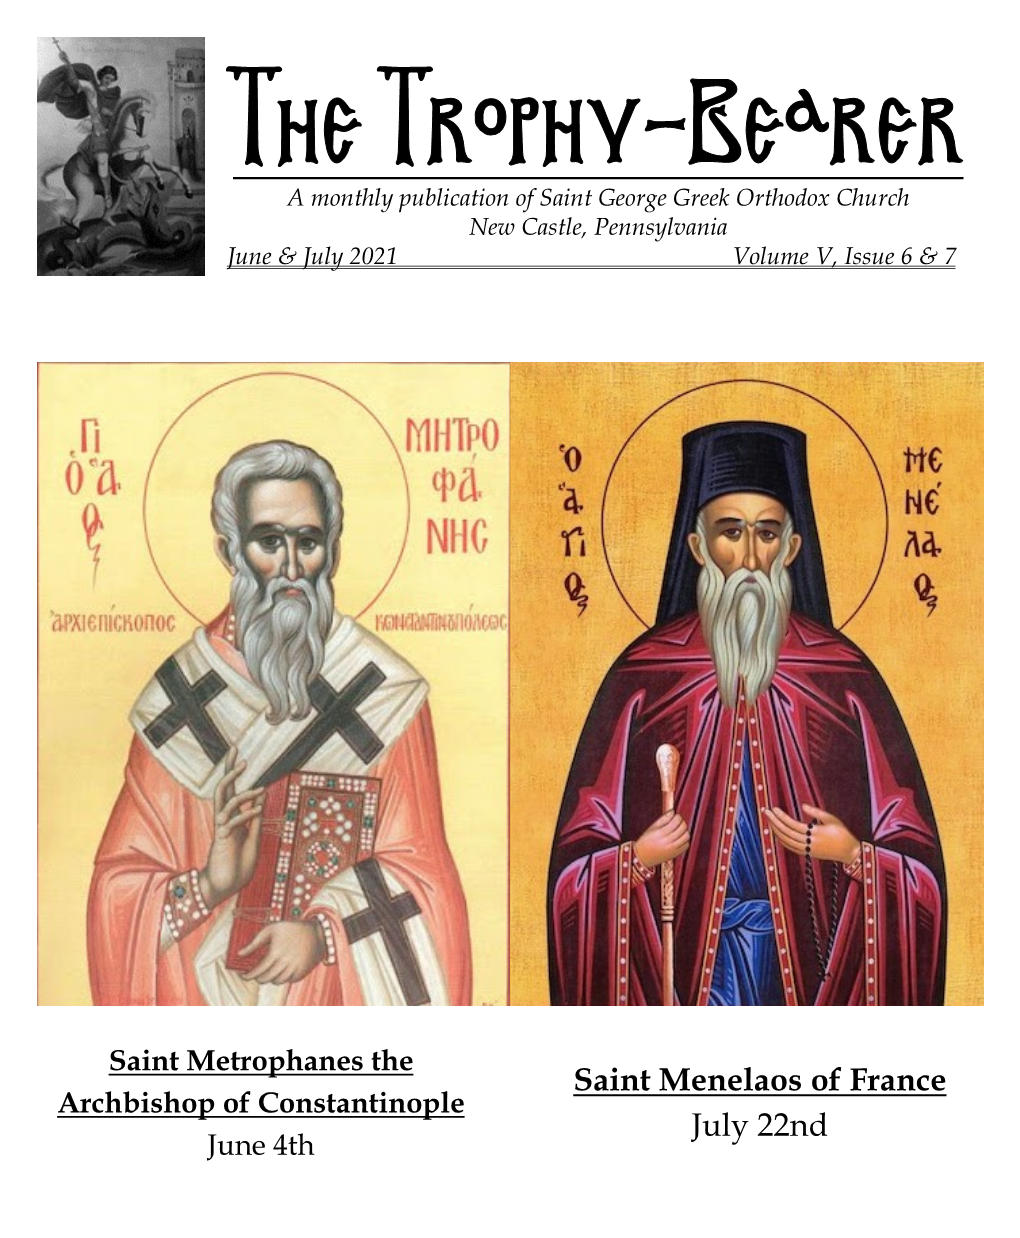 The Trophy-Bearer a Monthly Publication of Saint George Greek Orthodox Church New Castle, Pennsylvania June & July 2021 Volume V, Issue 6 & 7